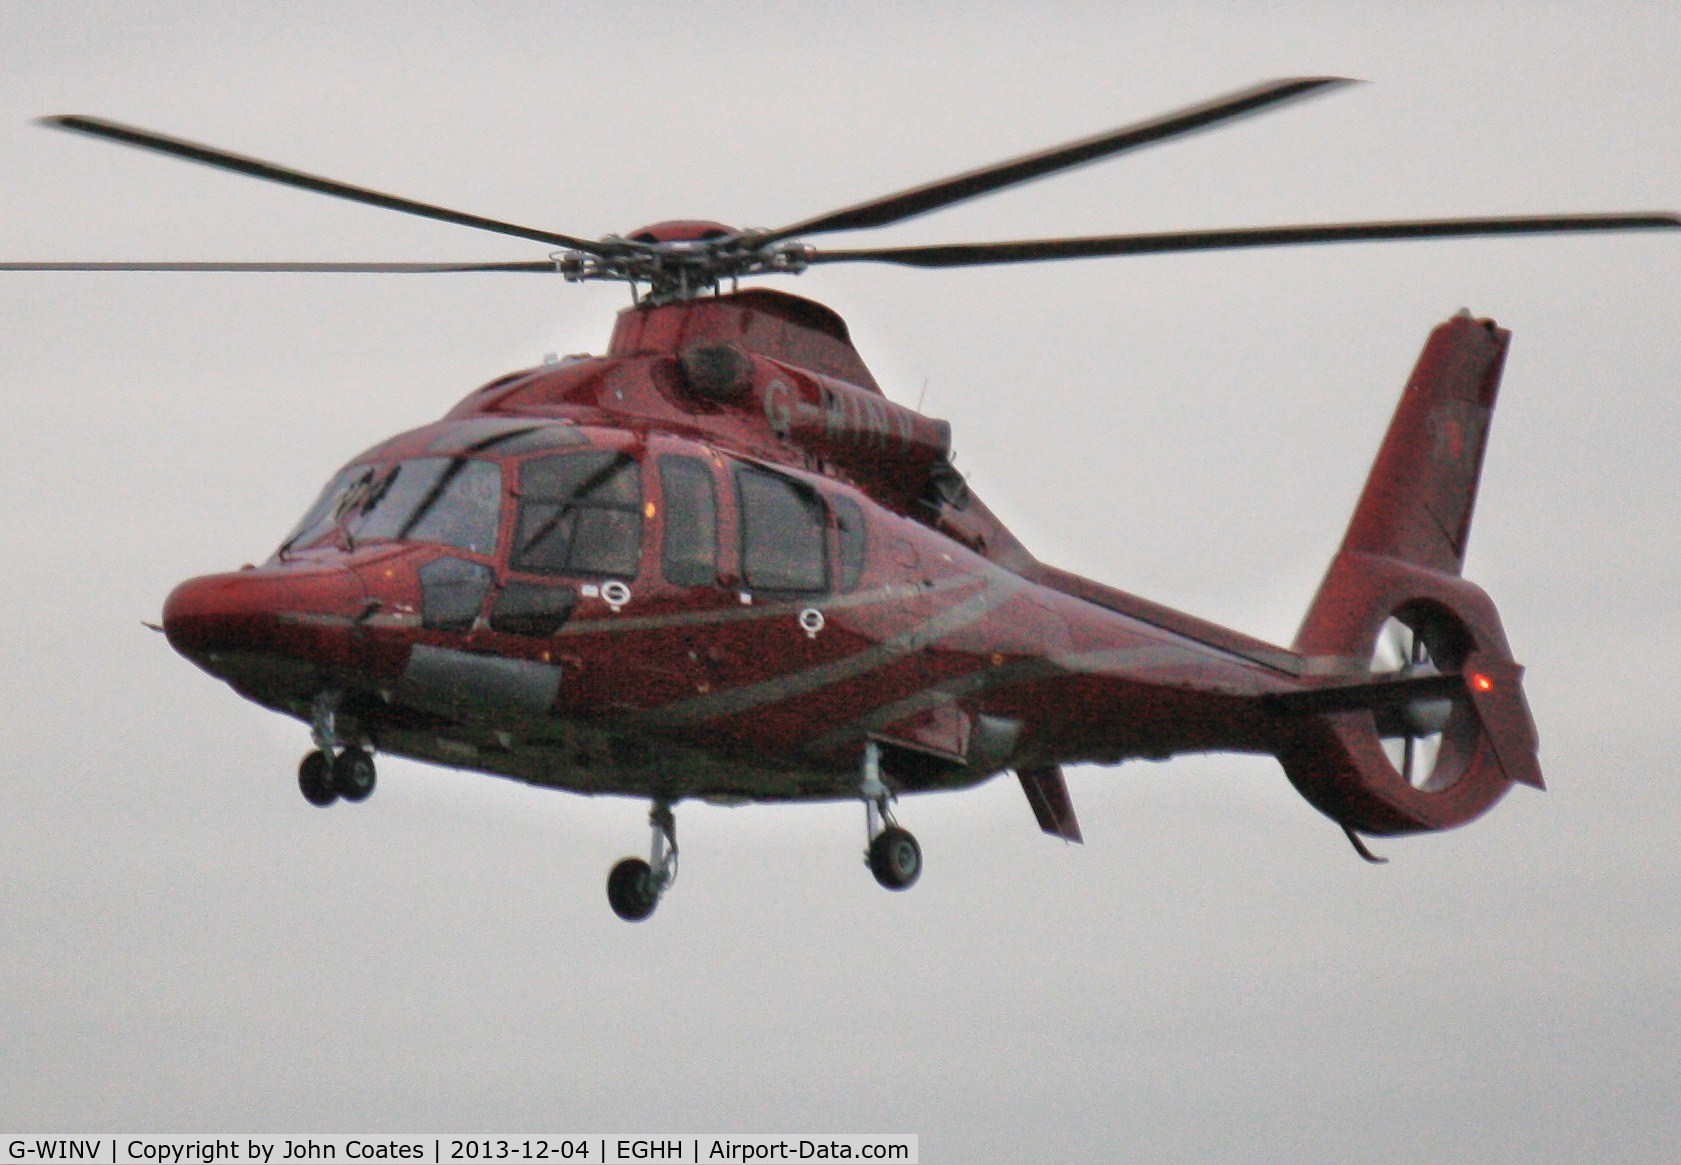 G-WINV, 2006 Eurocopter EC-155B-1 C/N 6748, Arriving at Signatures on a very murky day